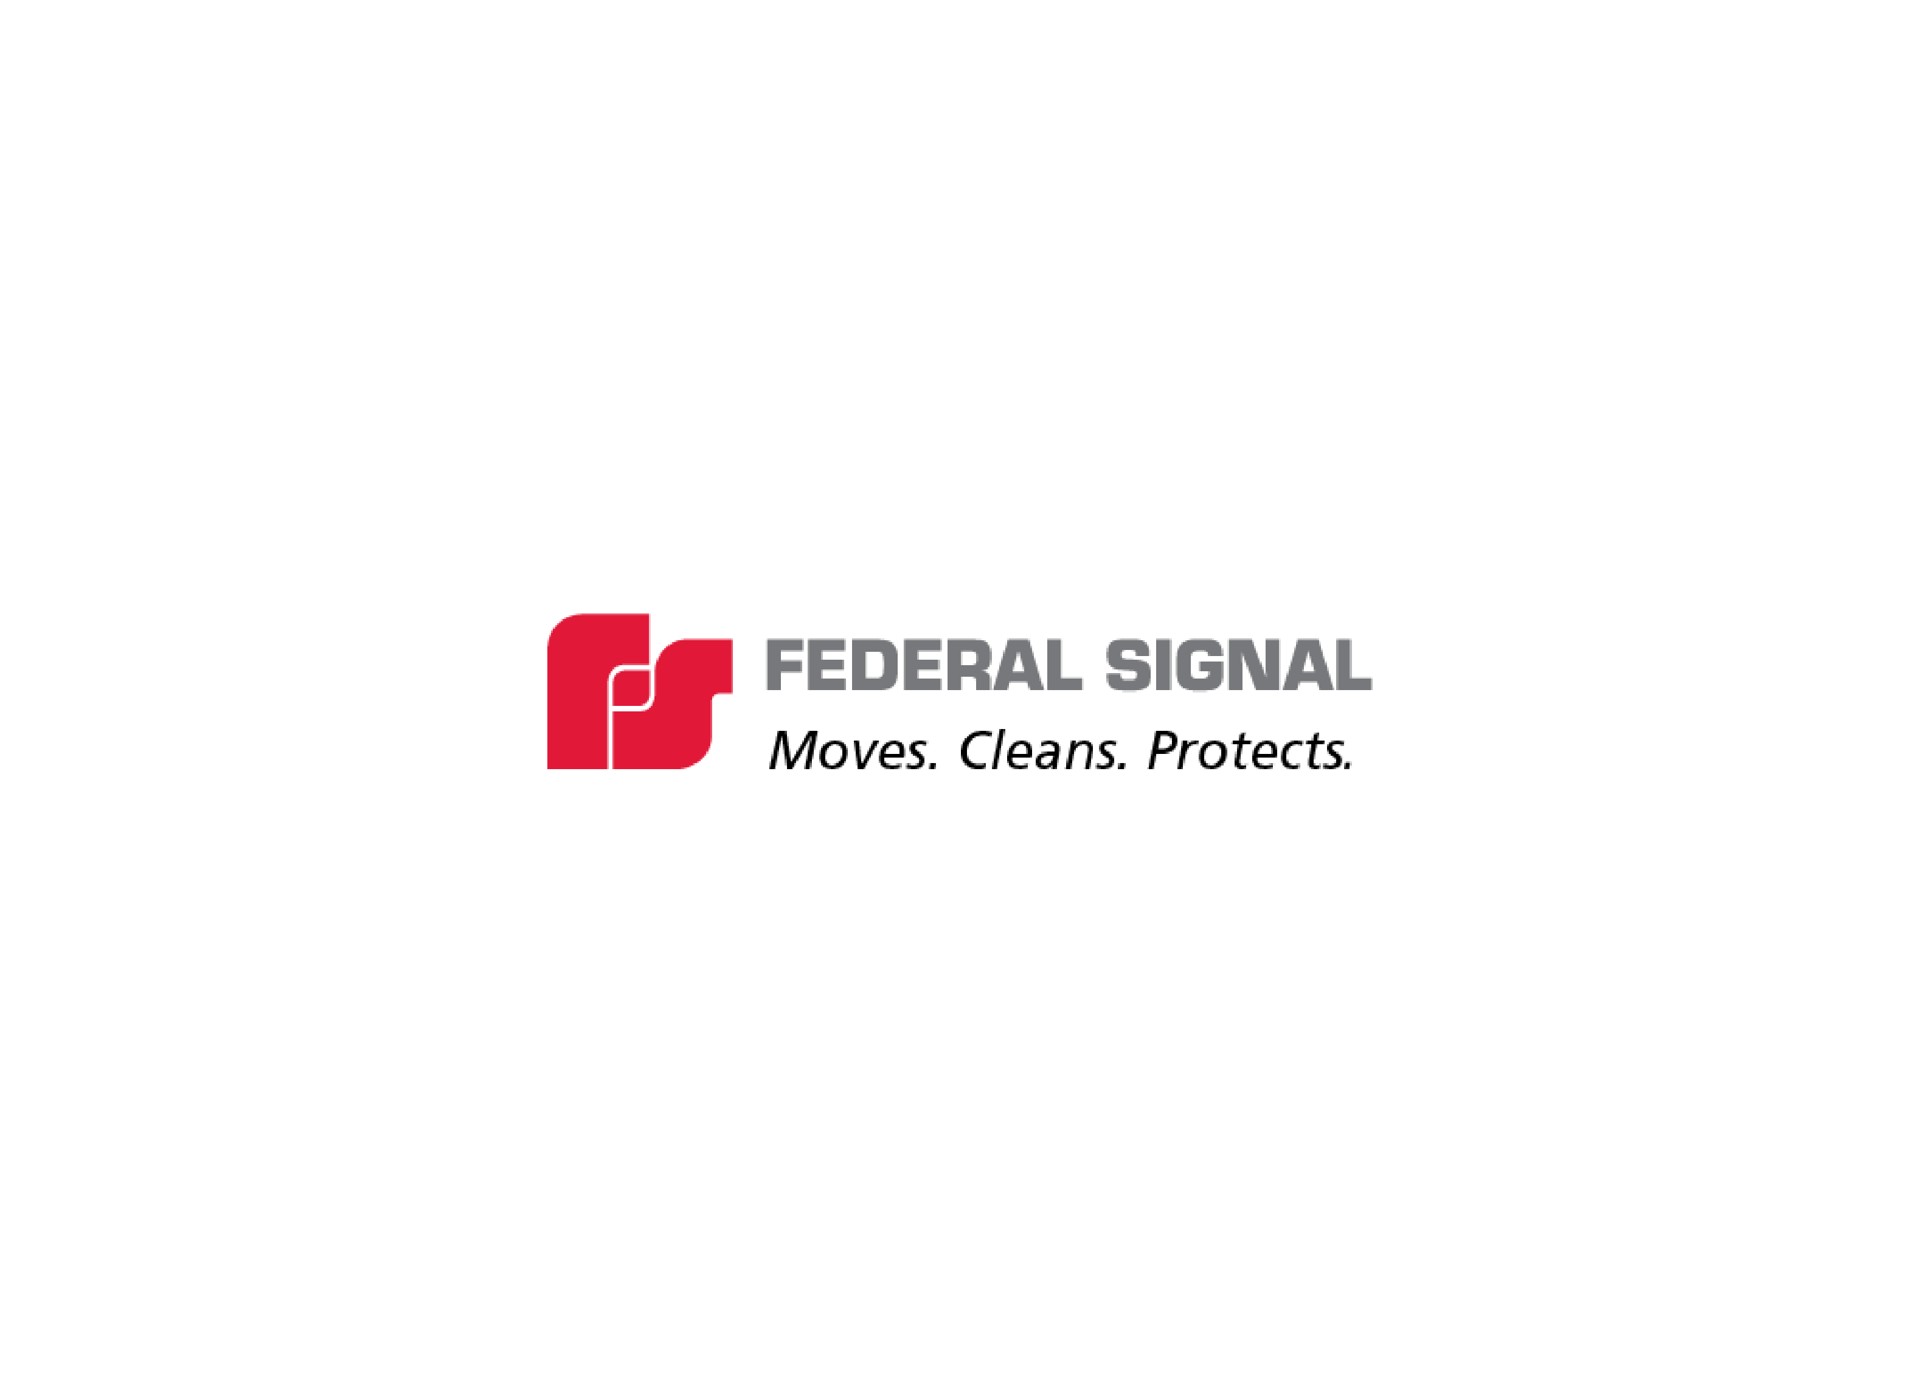 federal signal moves cleans protects | Federal Signal